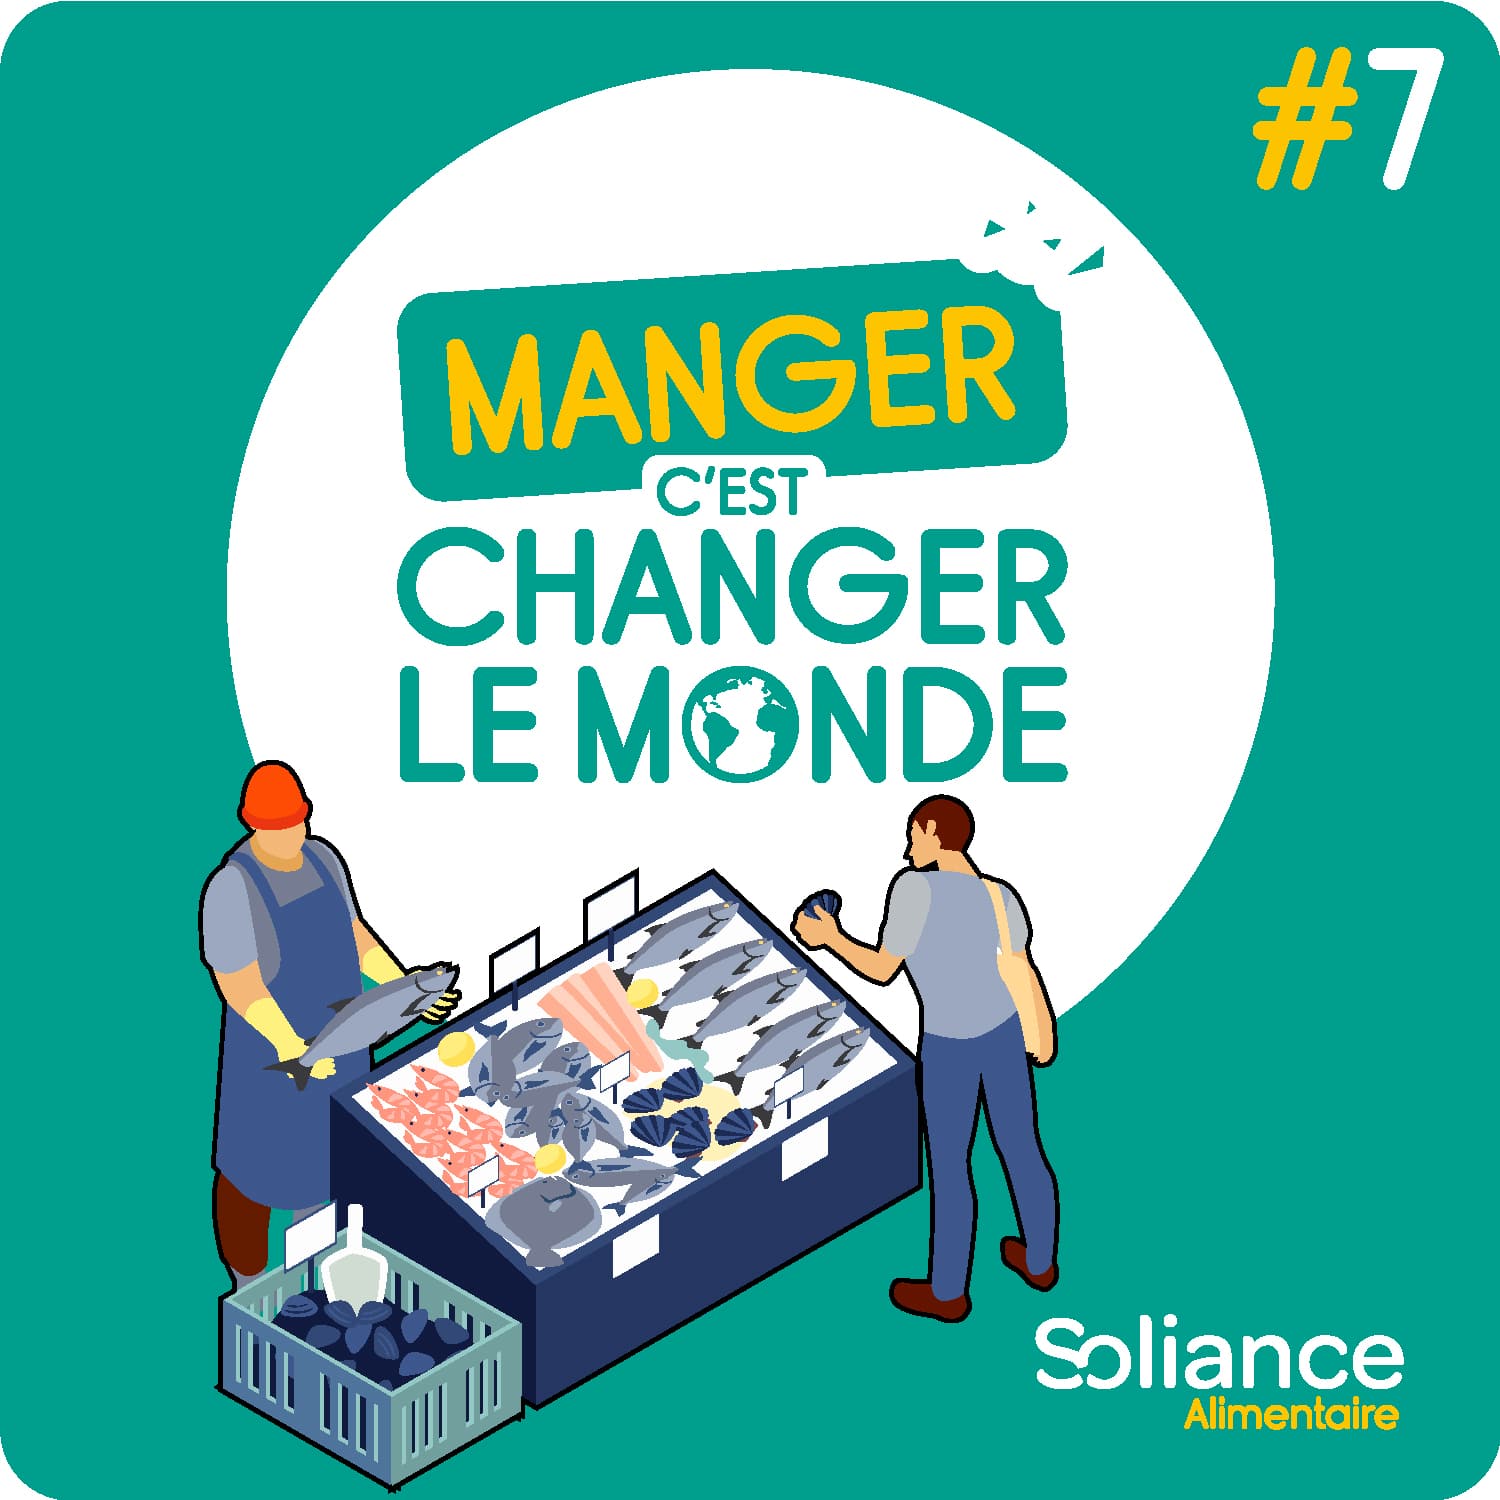 podcast on general interest markets in France and abroad, by Soliance alimentaire